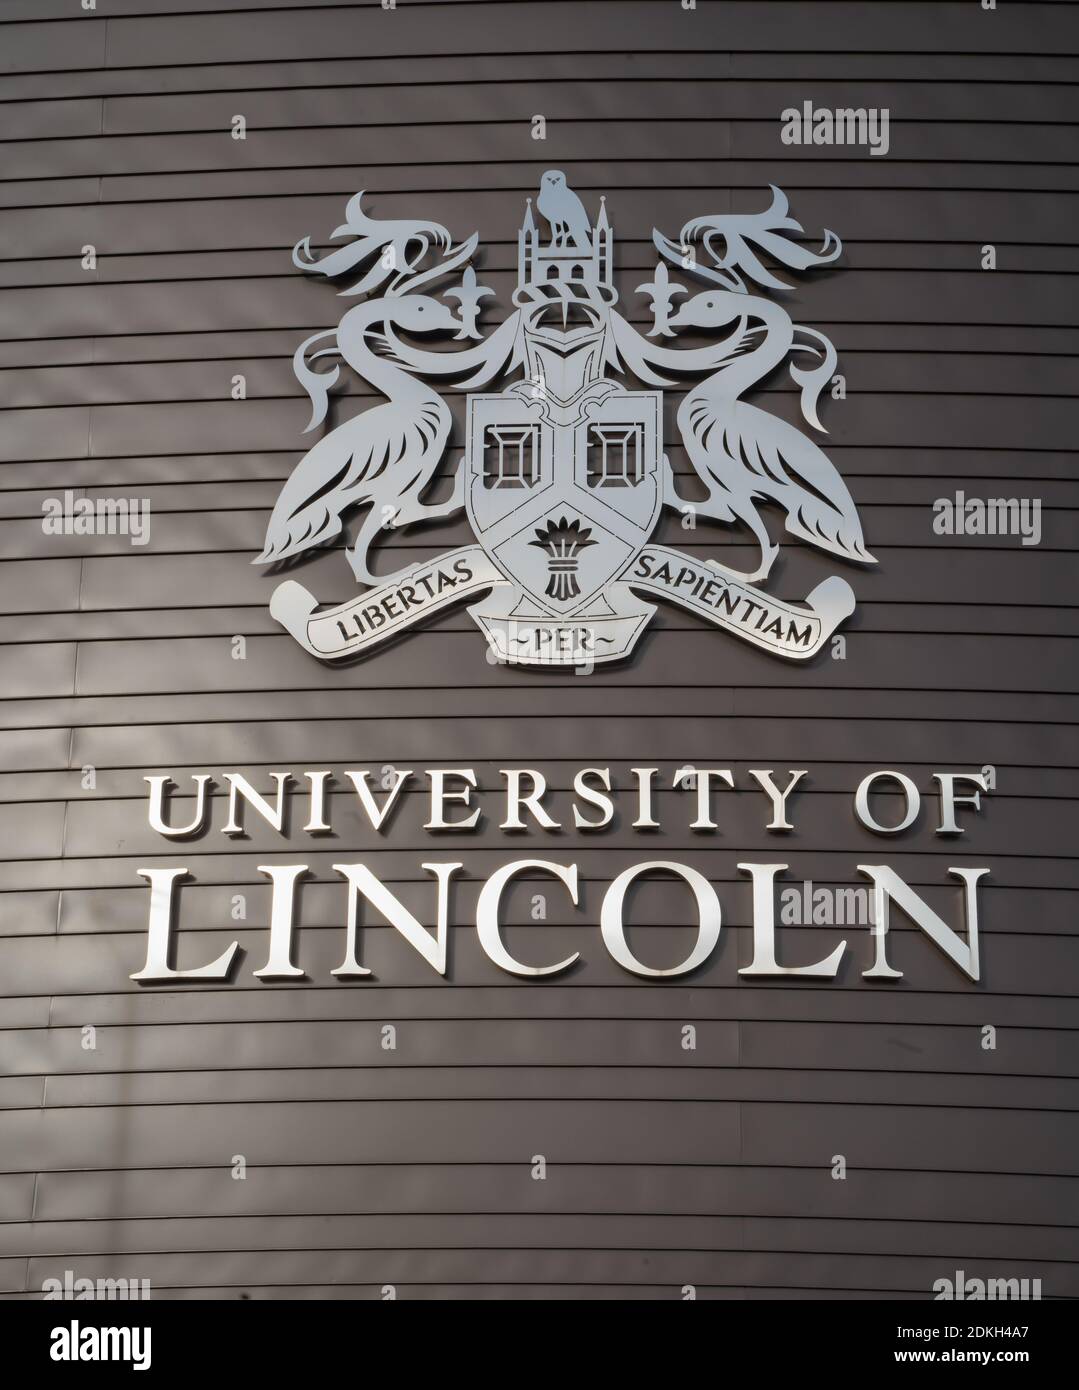 University of Lincoln, new building sign. Coat of arms and motto, Libertas, Sapientiam, Latin Through Wisdom, Liberty, junction of river and canal. Stock Photo